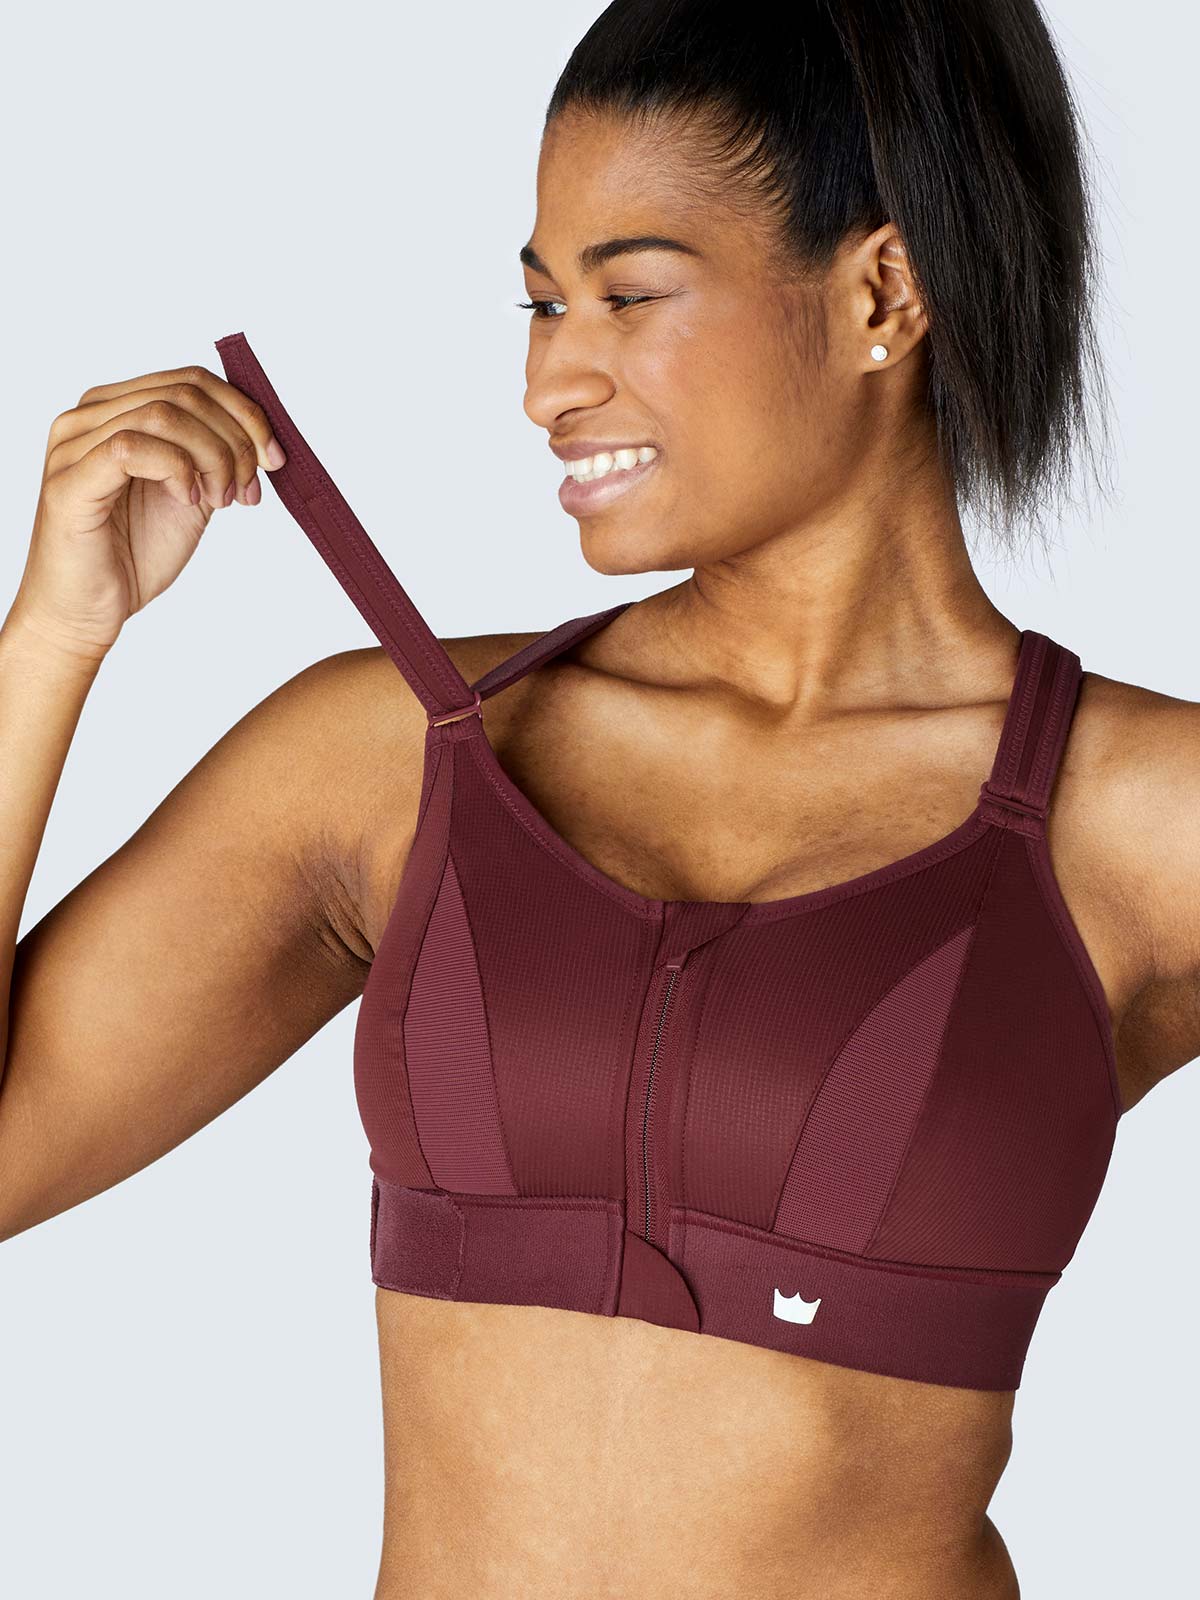 Sports Bra – How To Find A Perfect Fit